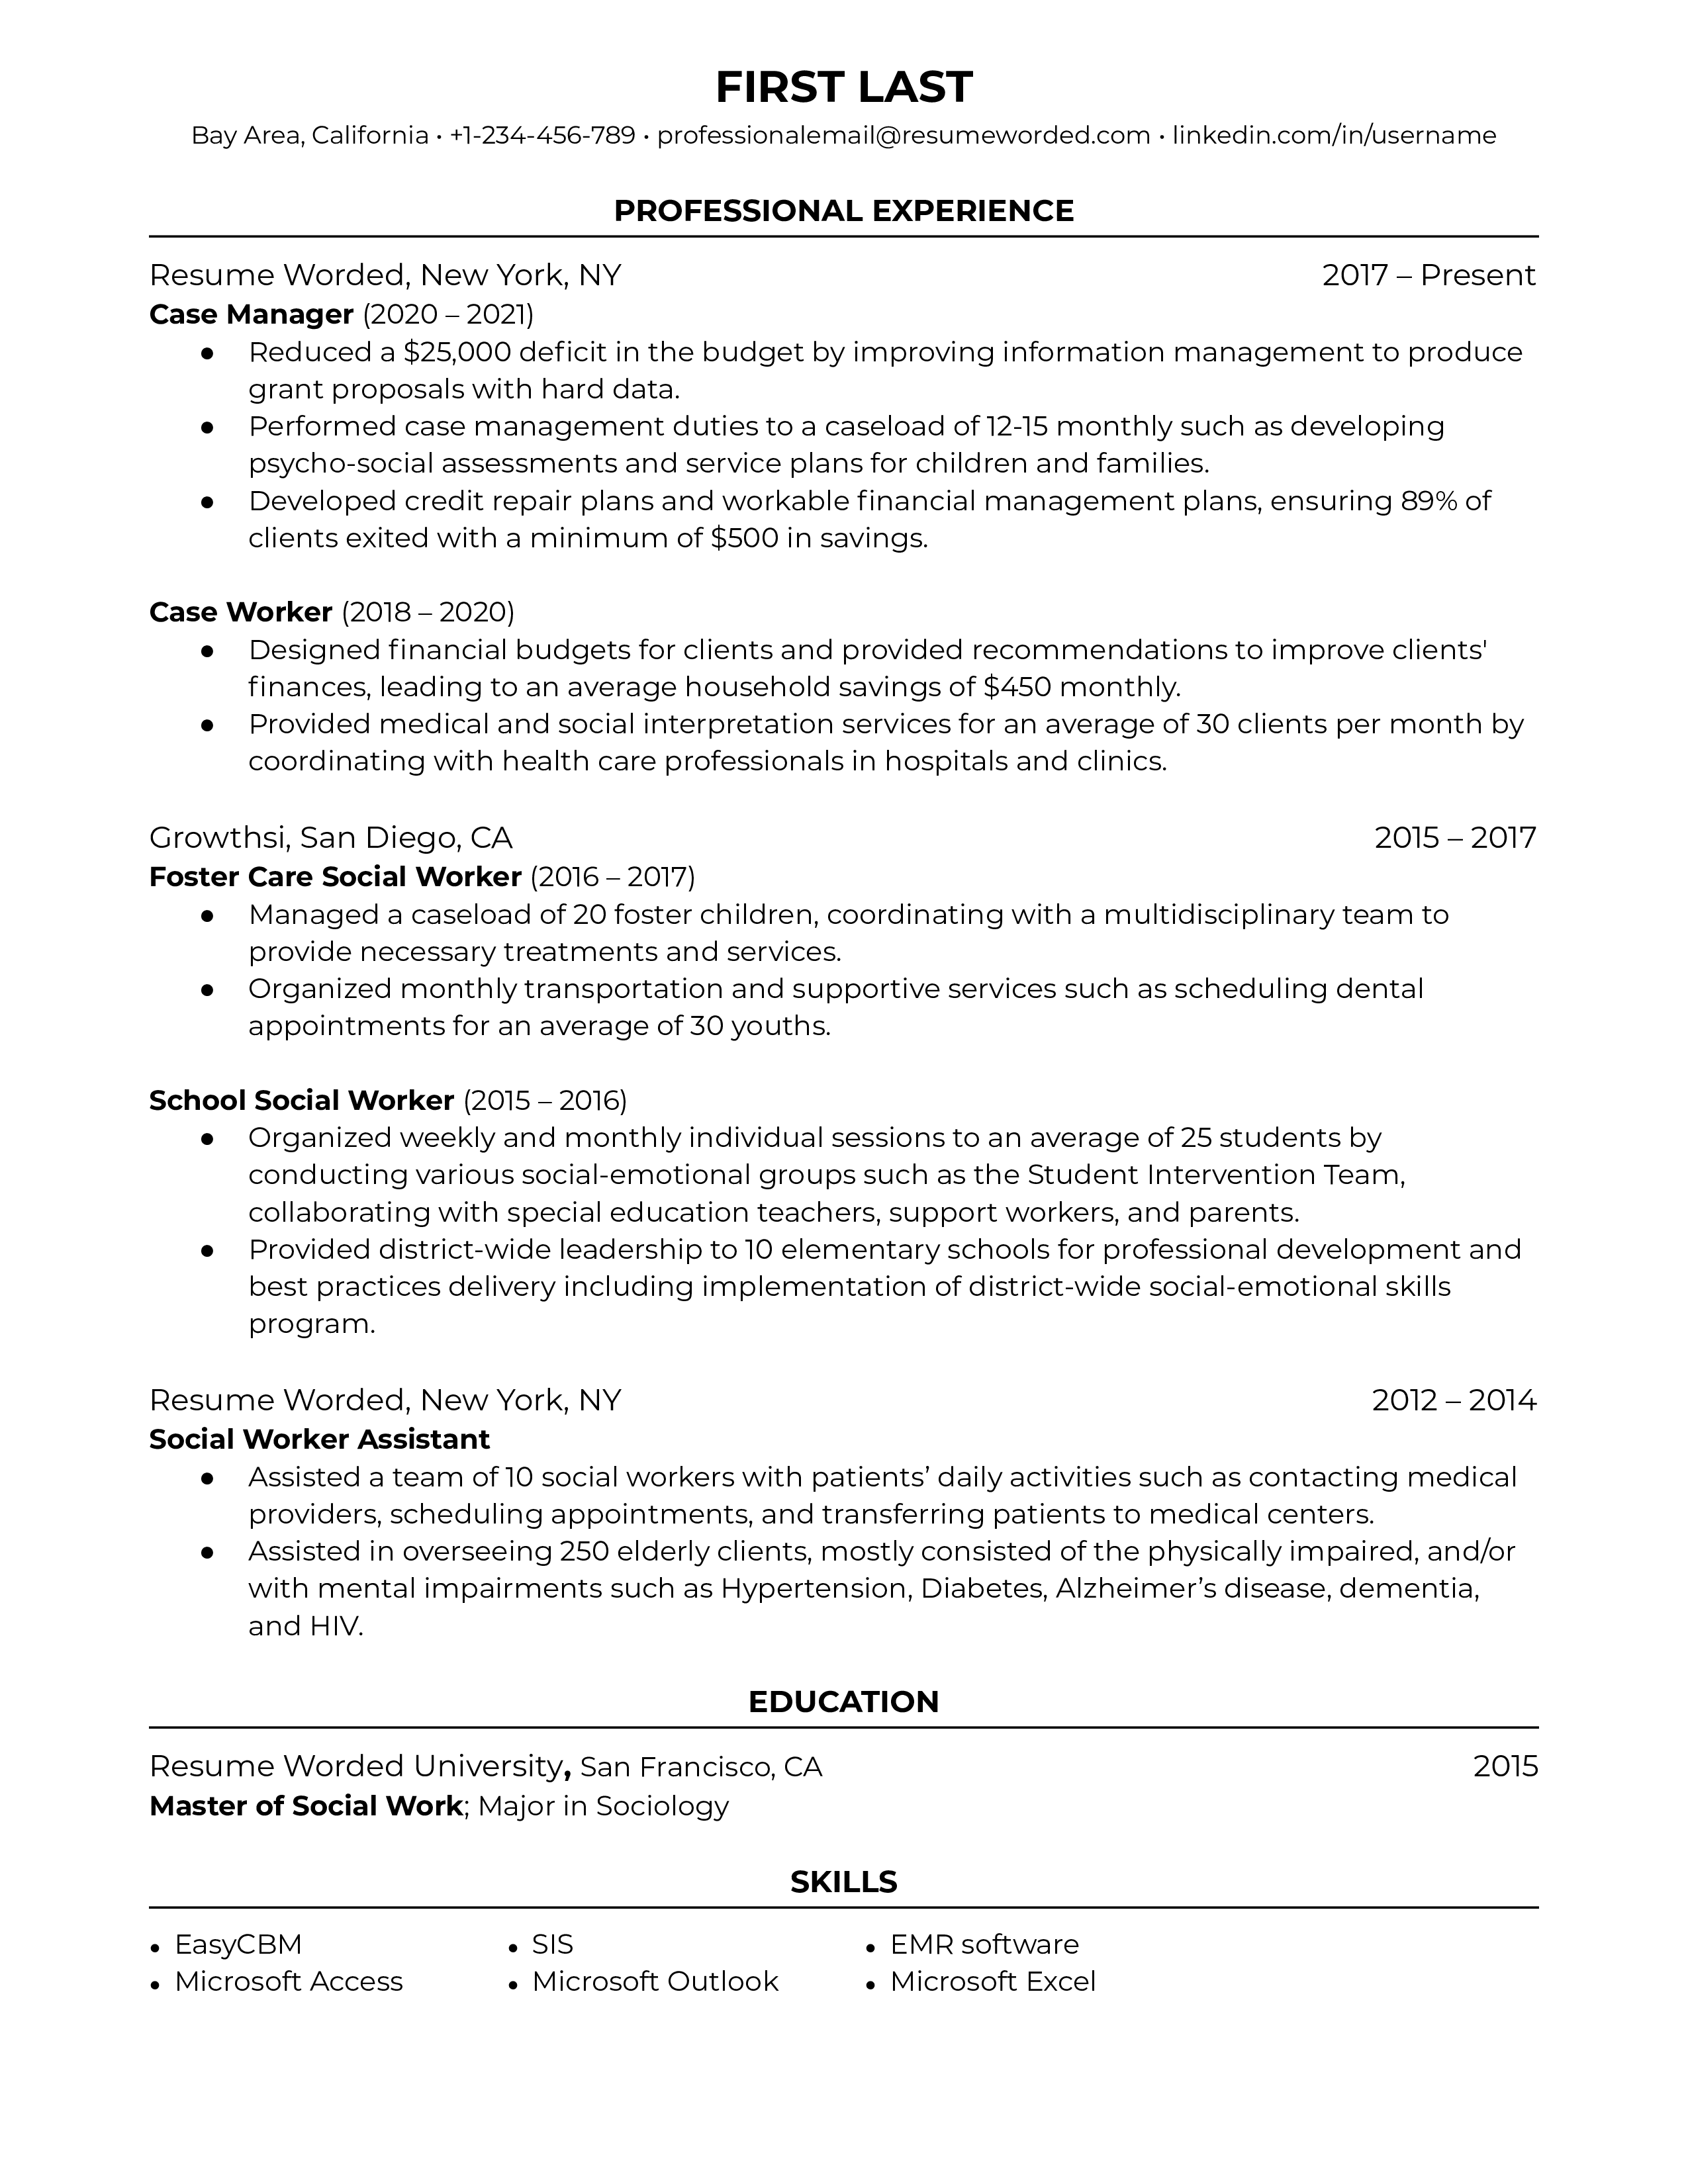 Case manager resume template example featuring strong bullet points and using accomplishments to highlight transferable skills